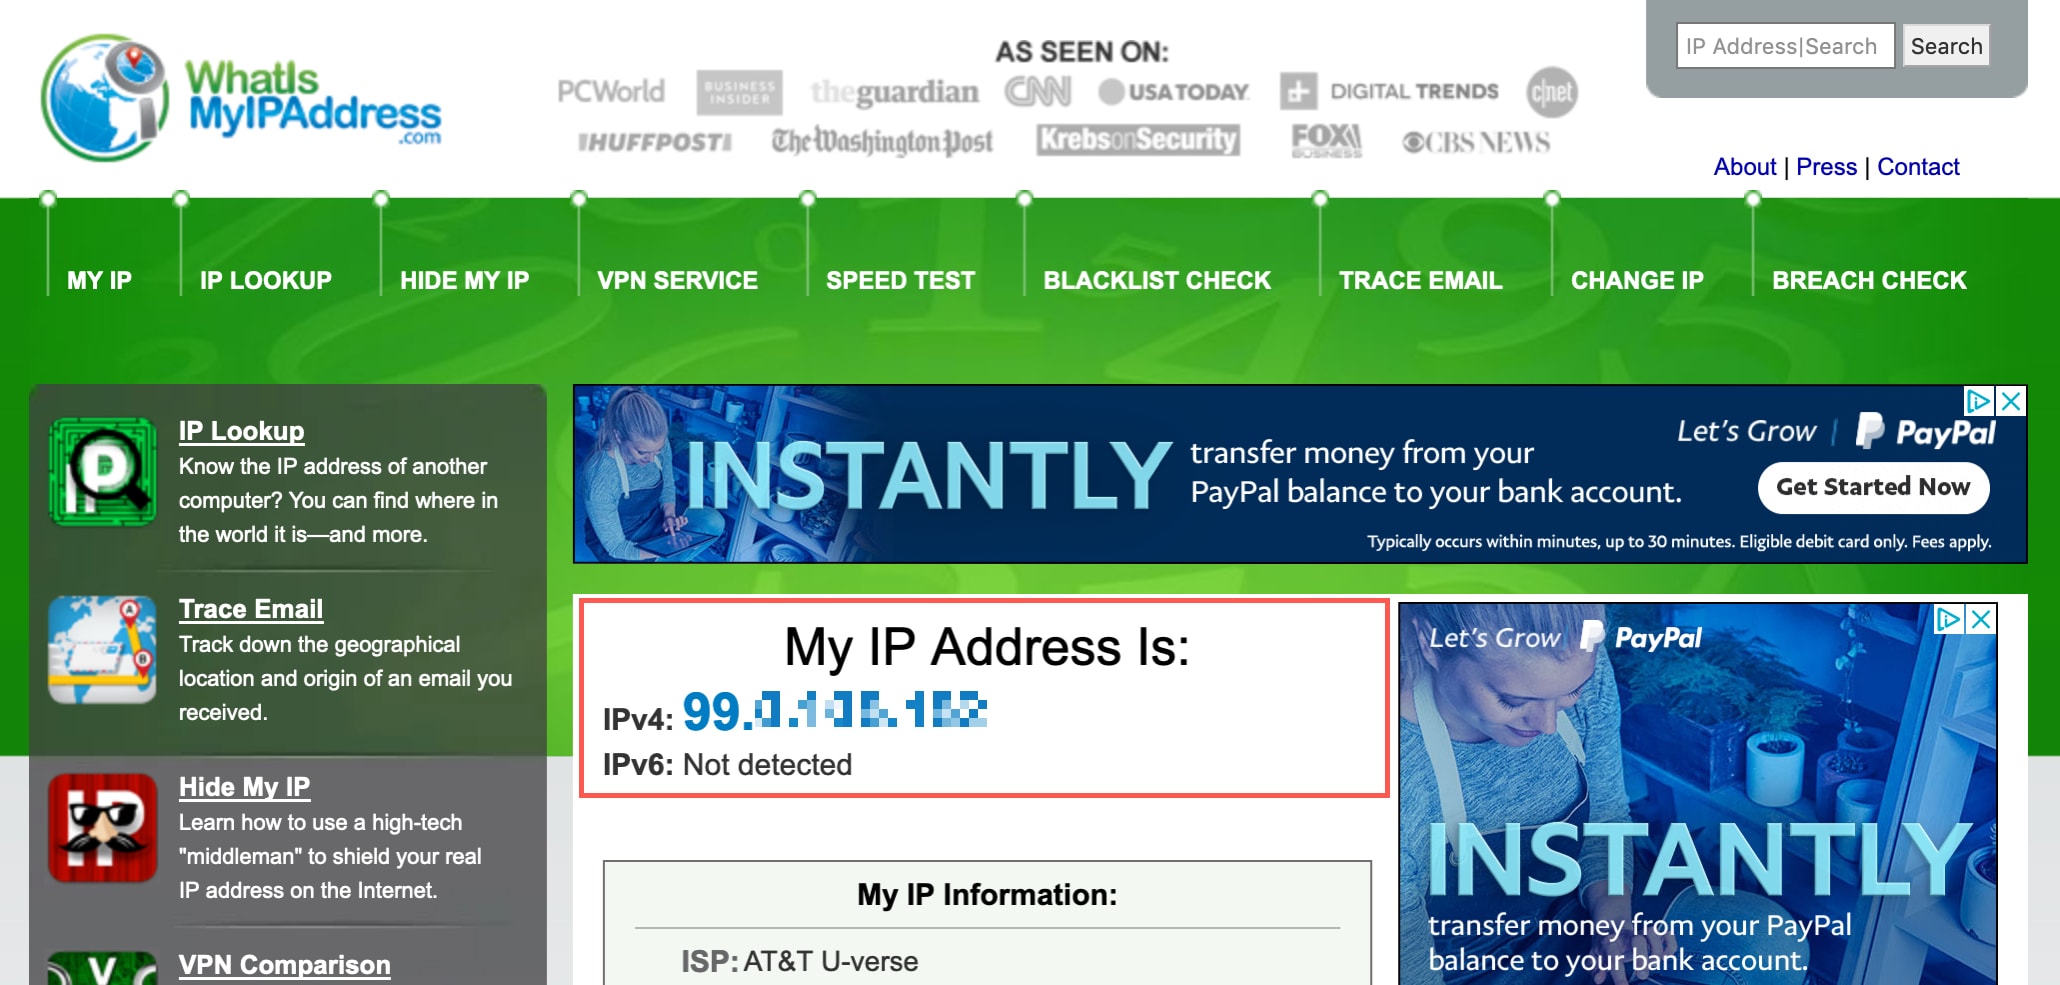 What Is My IP Address Website